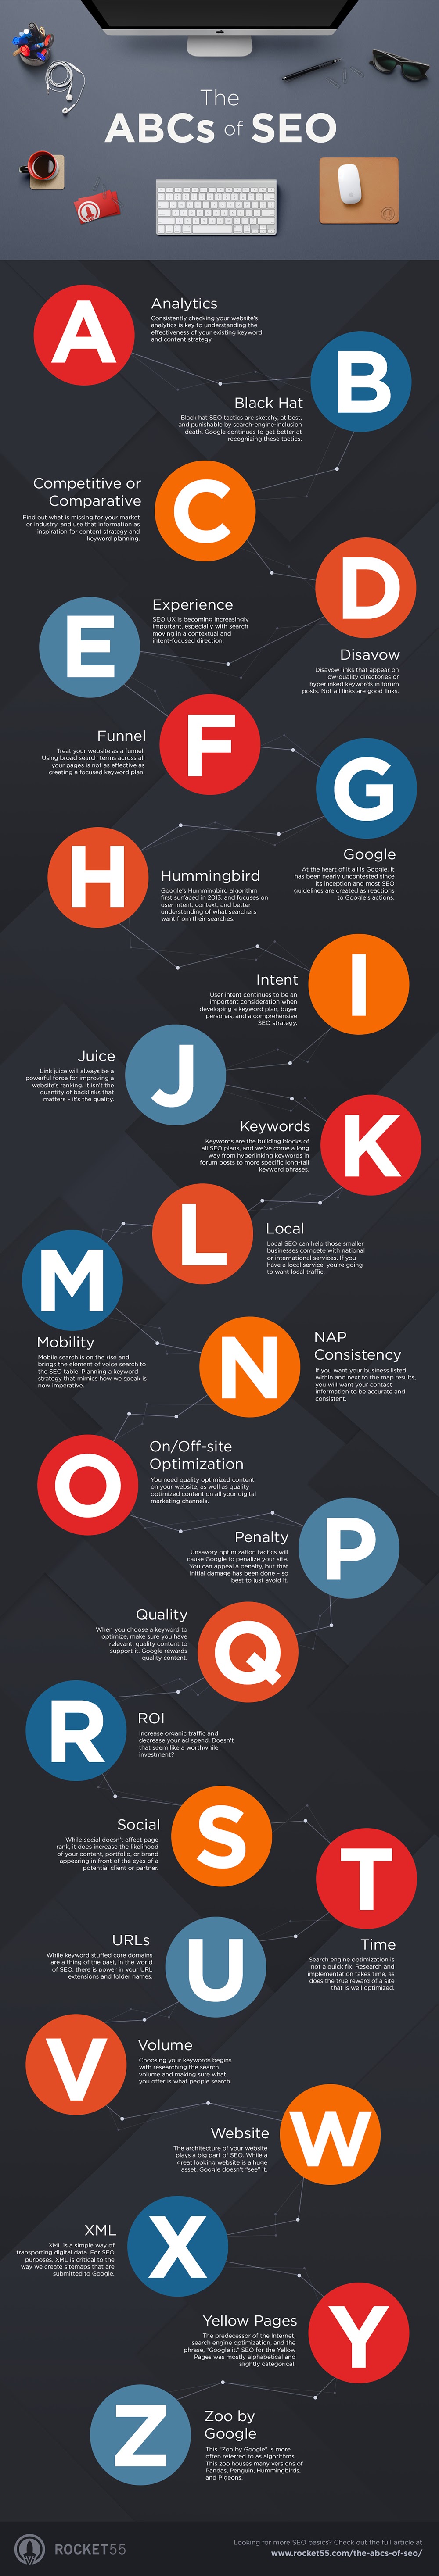 The ABCs of SEO #Infographic